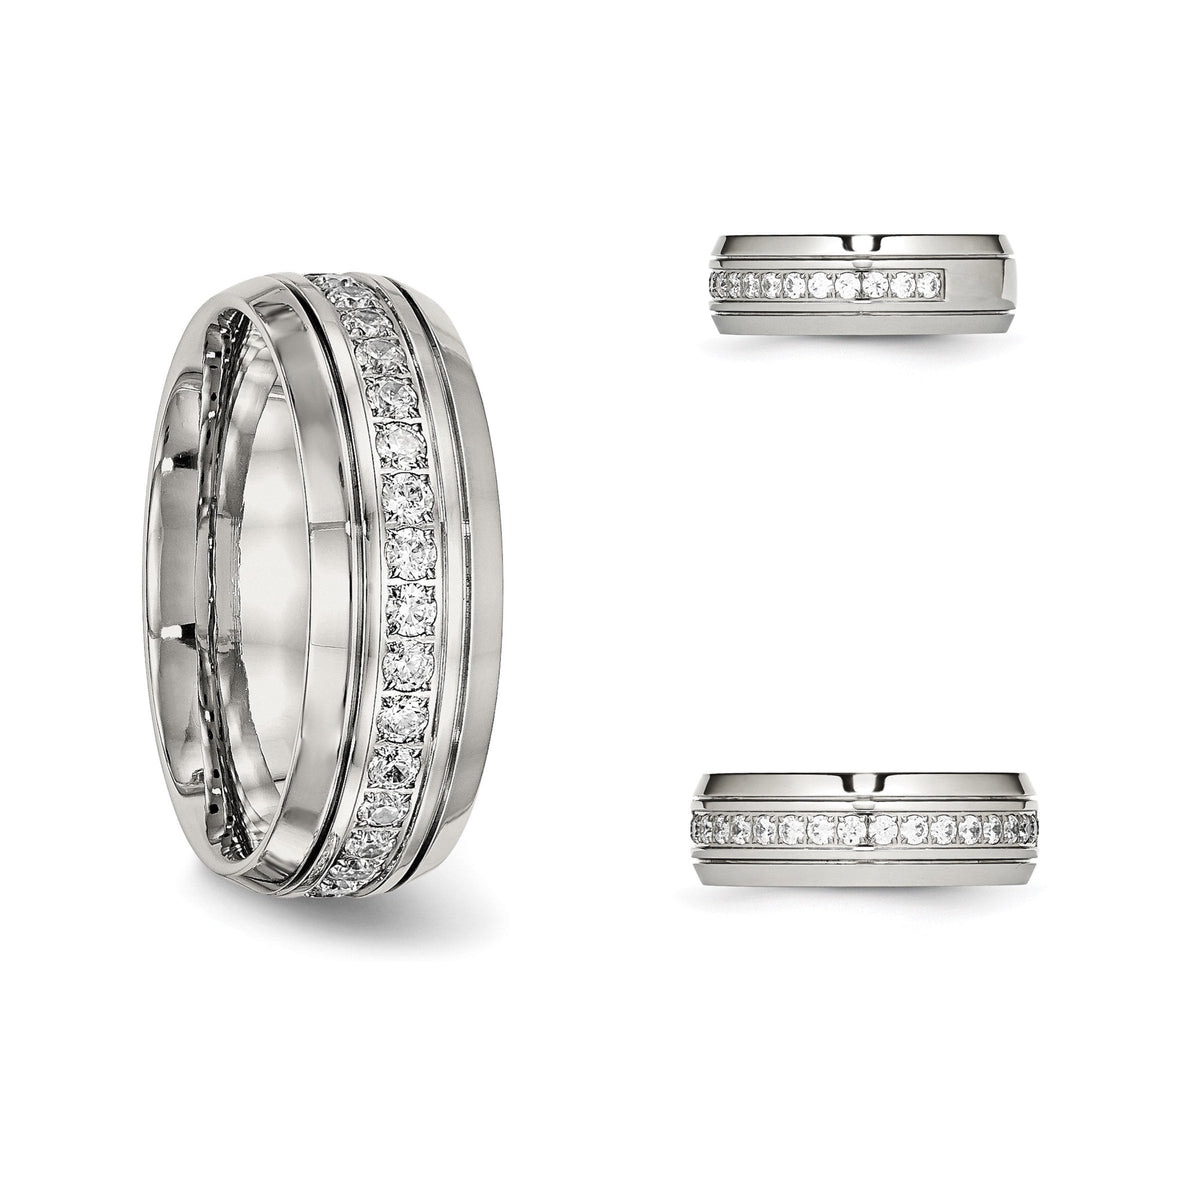 Mens Stainless Steel Polished and Grooved with CZ 8mm Half Round Band Mens Ring w/ Cubic Zirconias  Gift Box Included